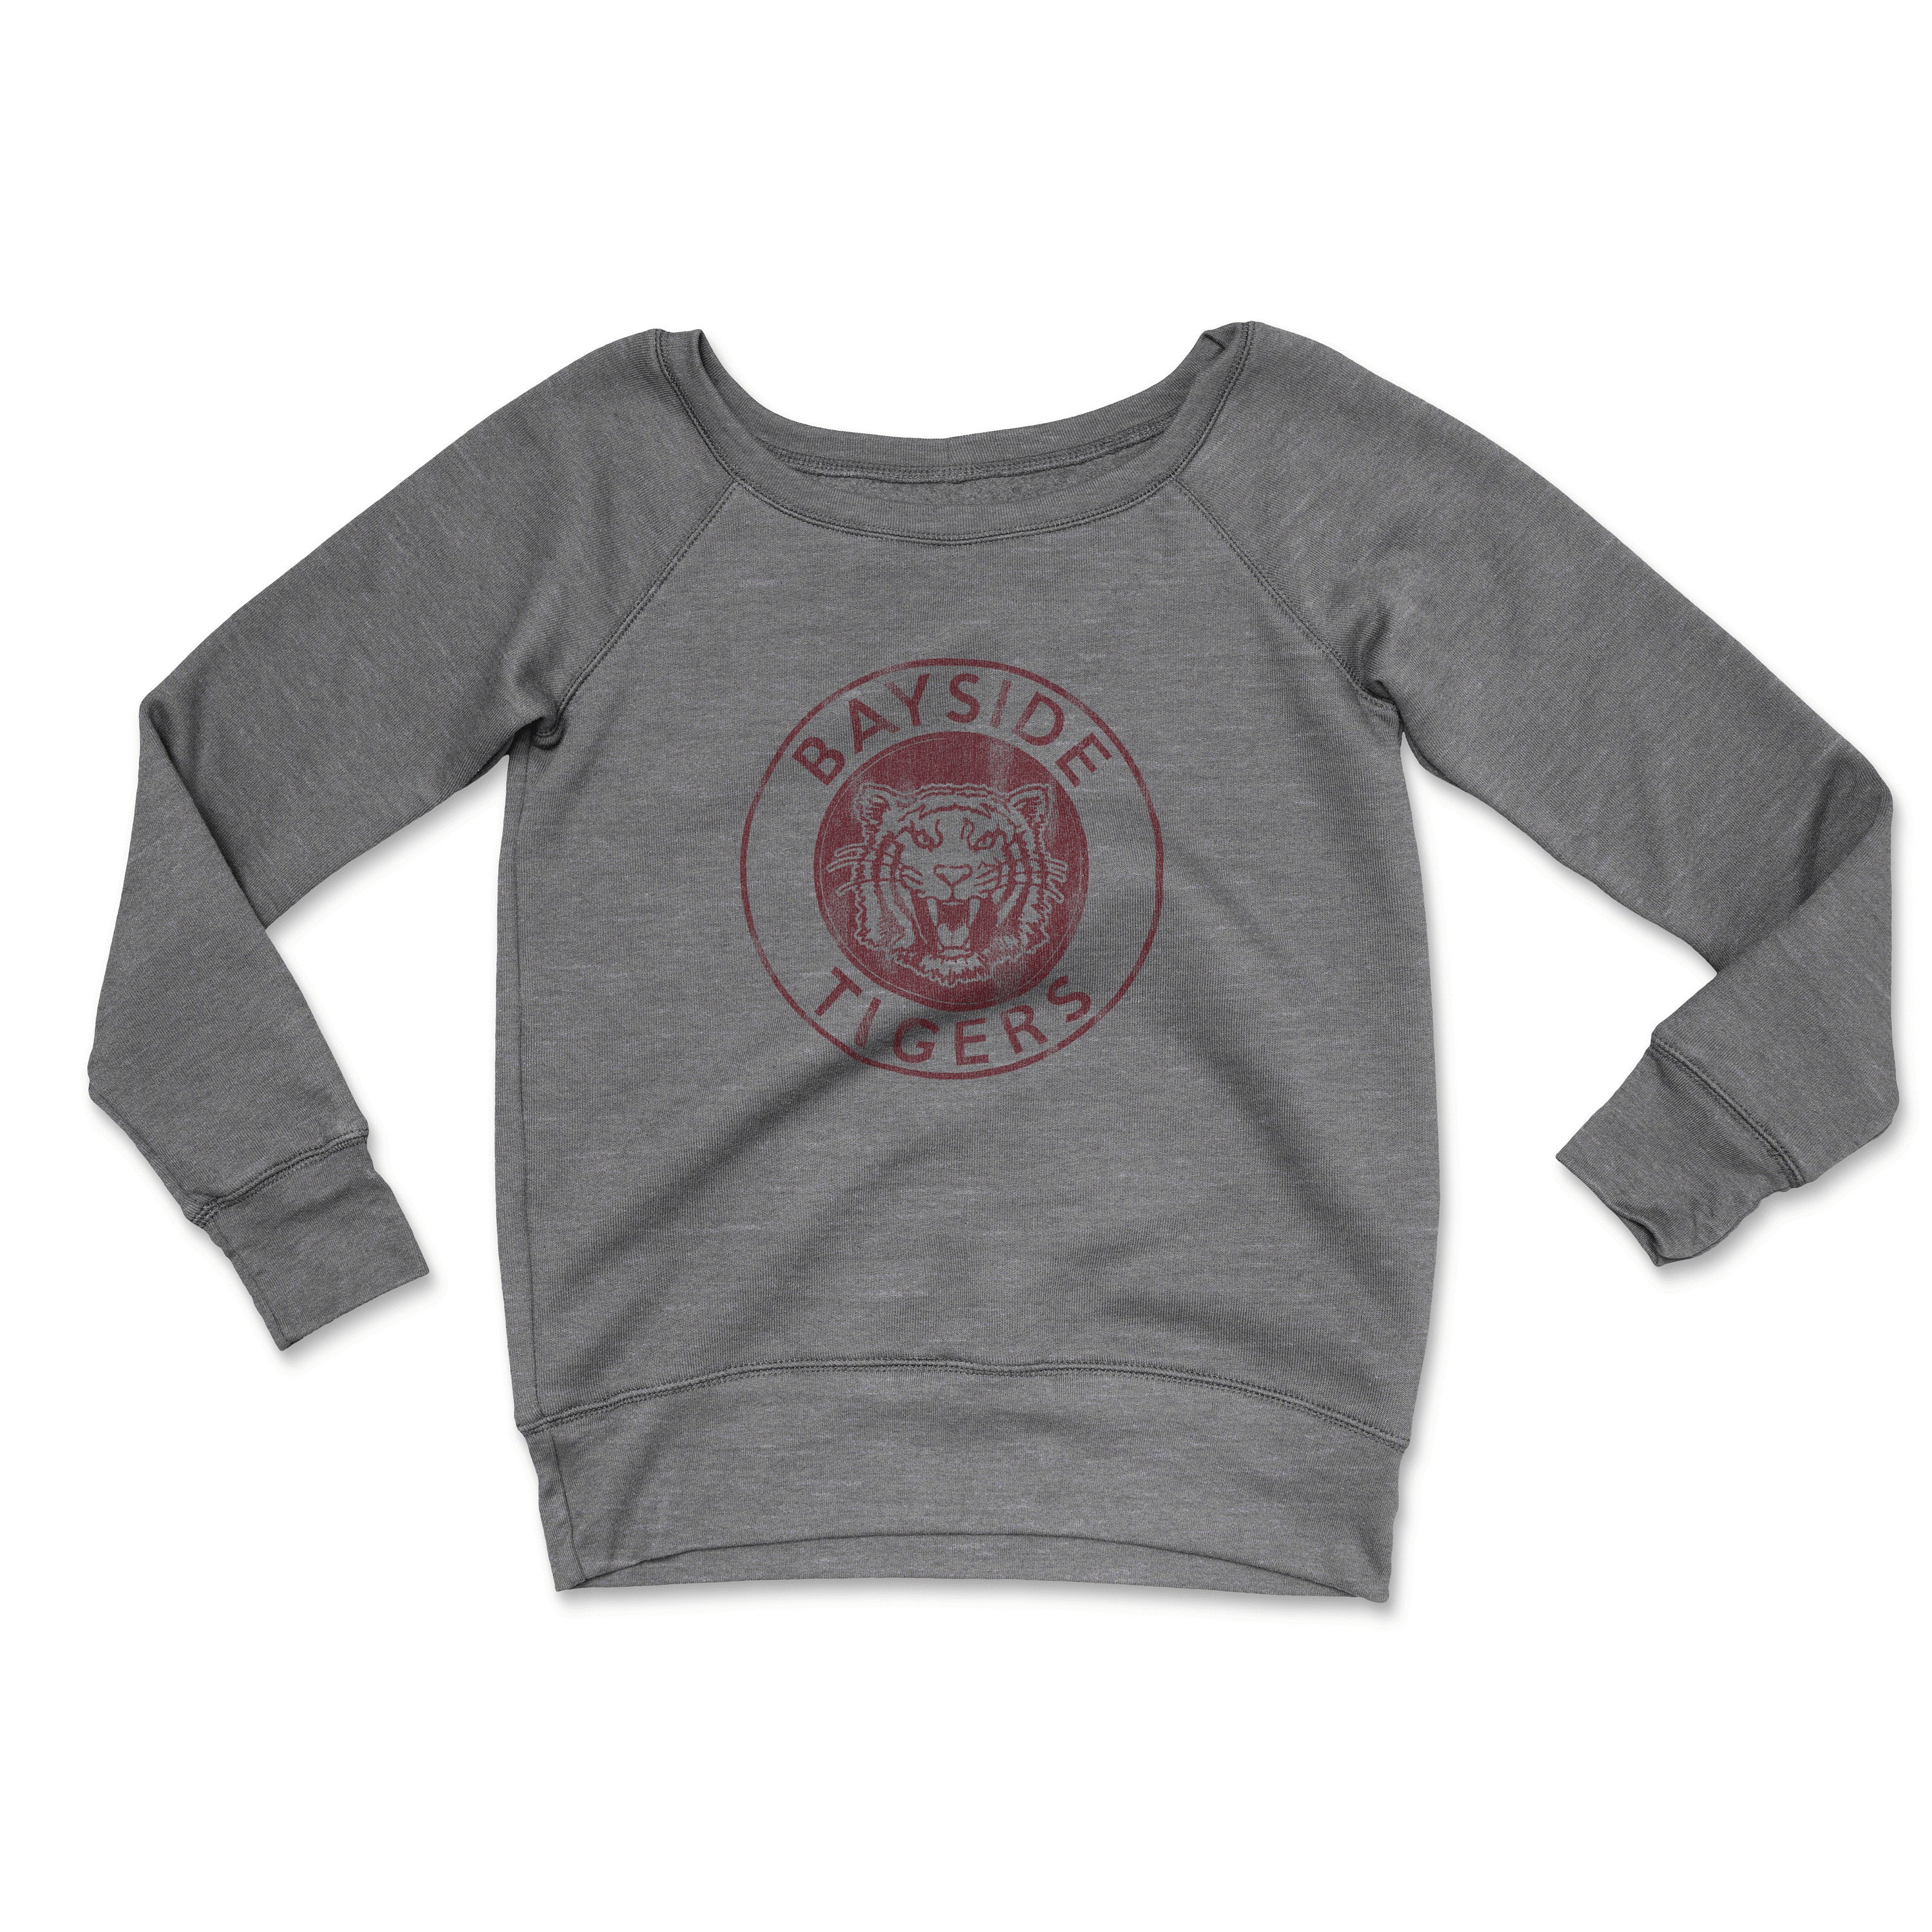 Vintage Run With The Tiger Neutral Tan V-Neck Sweater Made in